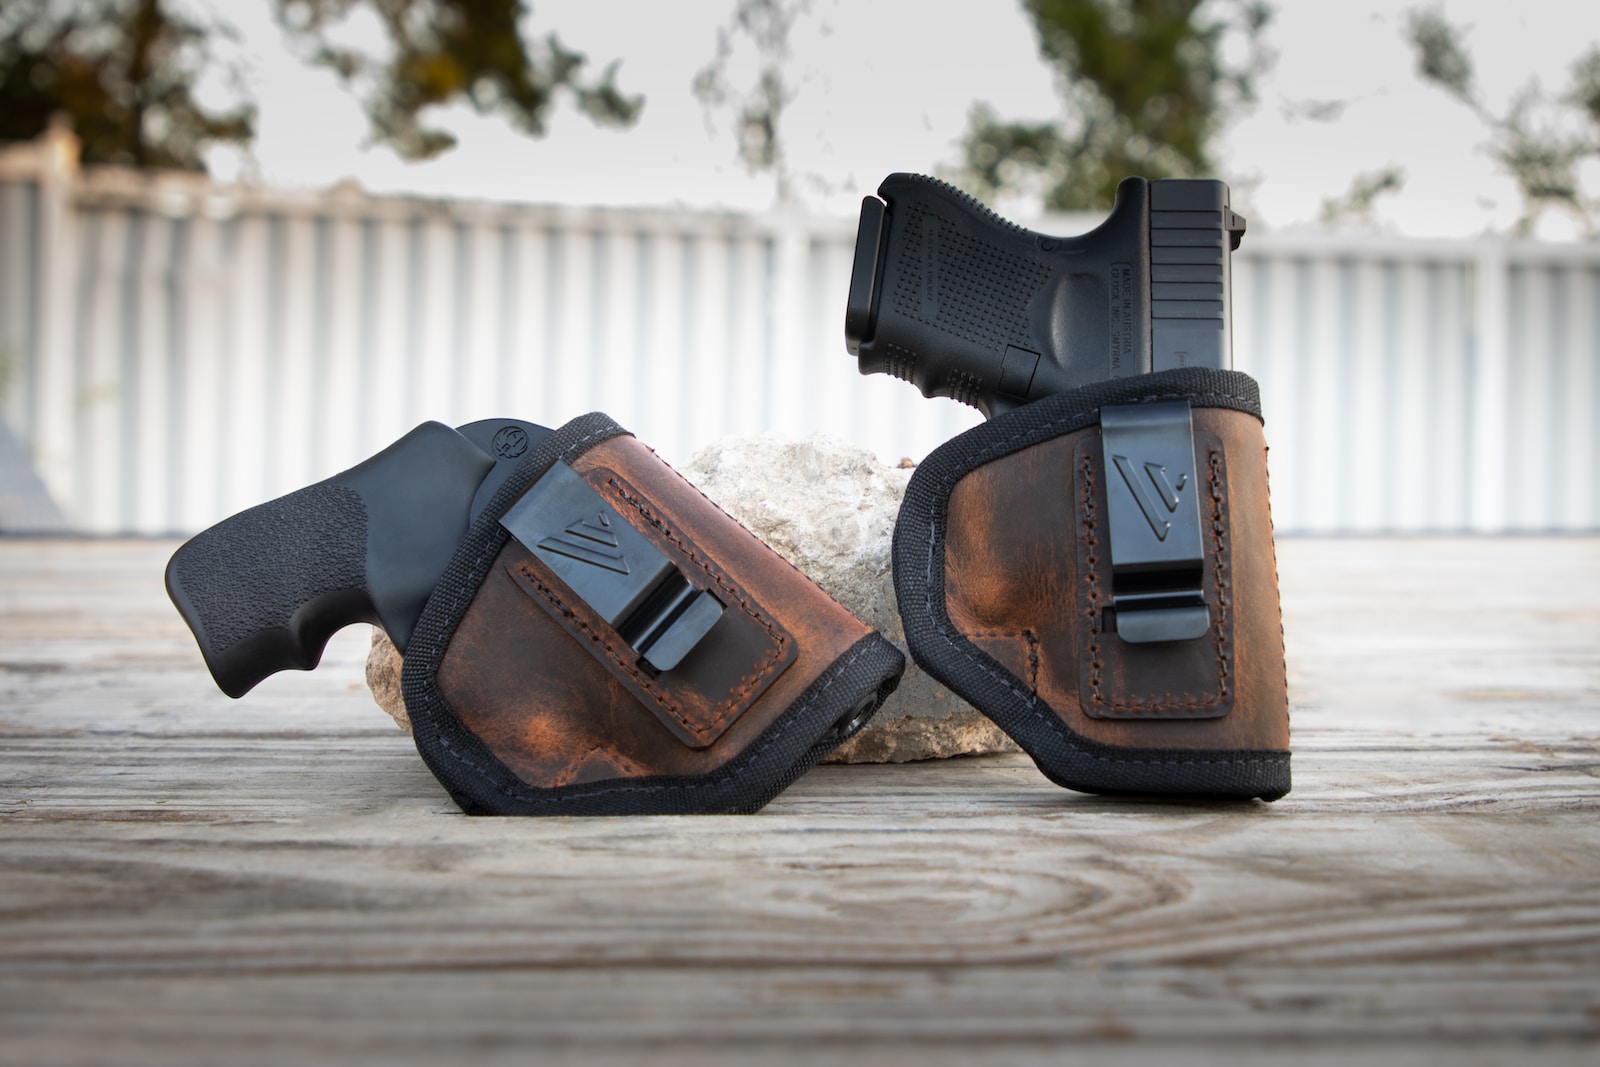 9mm pistols for concealed carry concealed carry gun a pair of watches